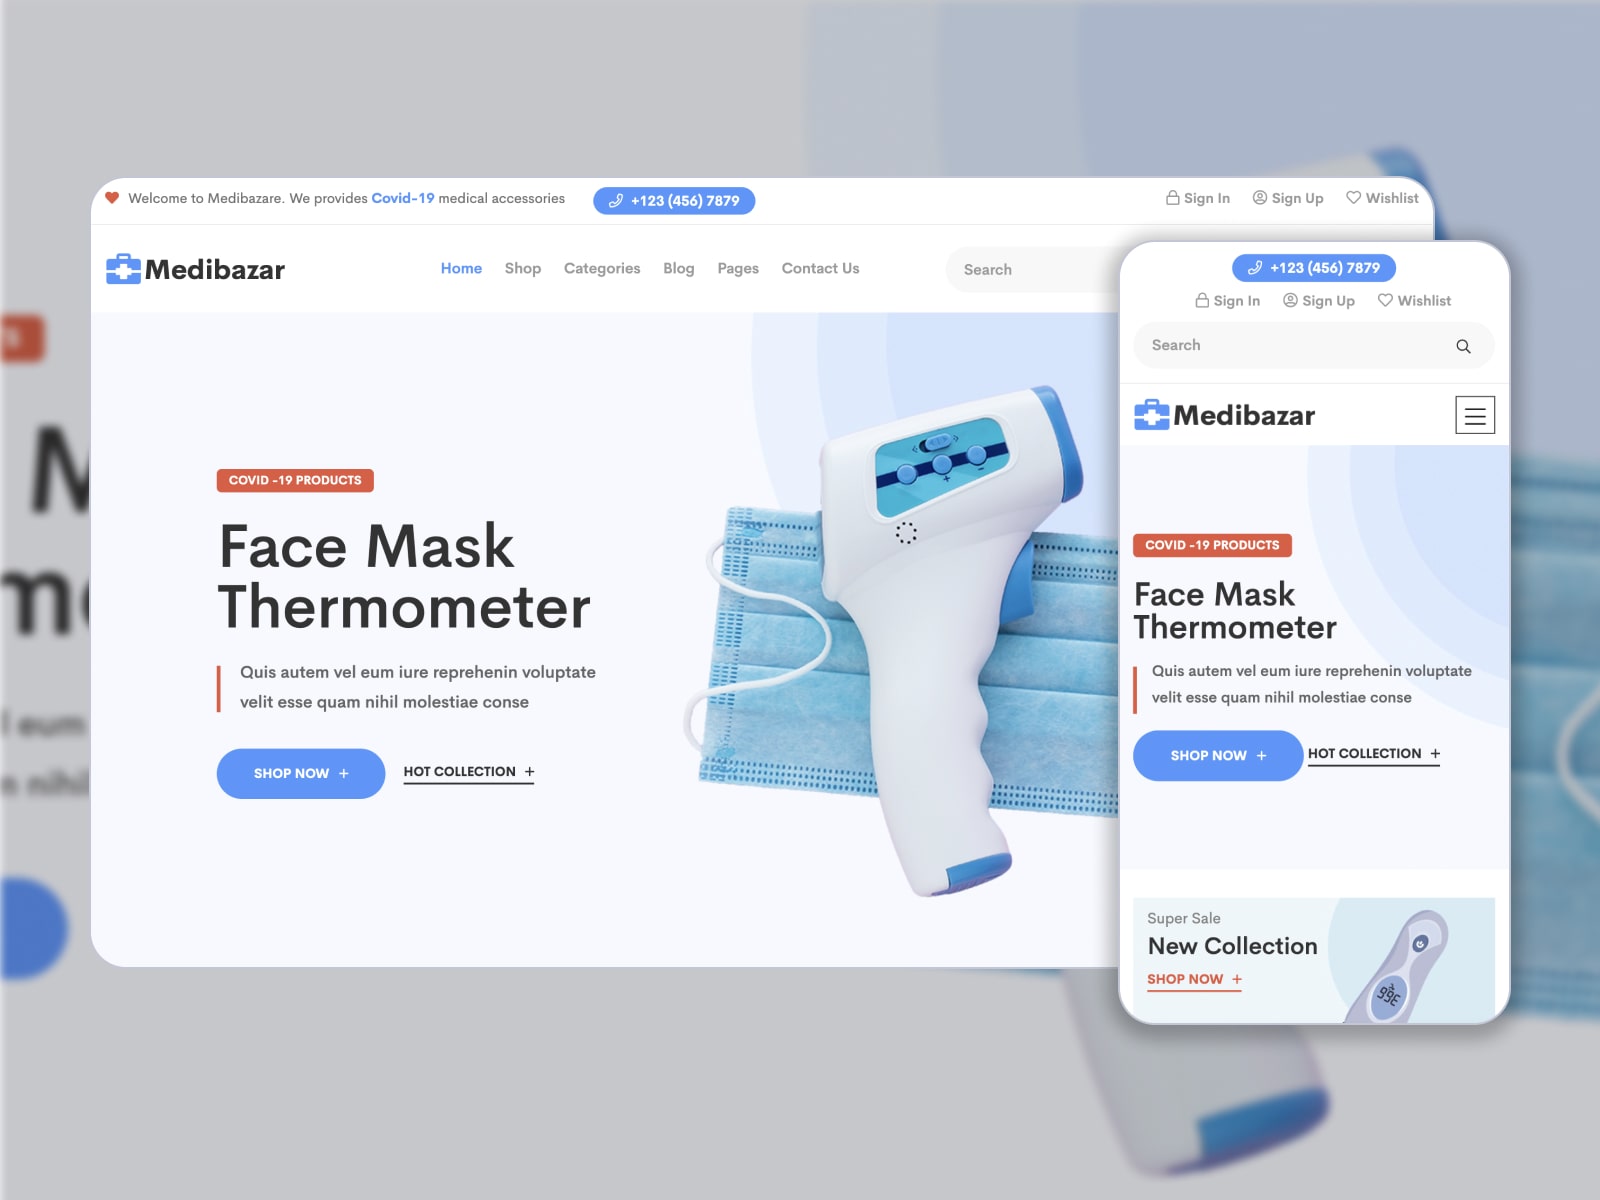 Collage of the Medibazar WooCommerce theme for WordPress medical websites in blue, light-blue and white colors.